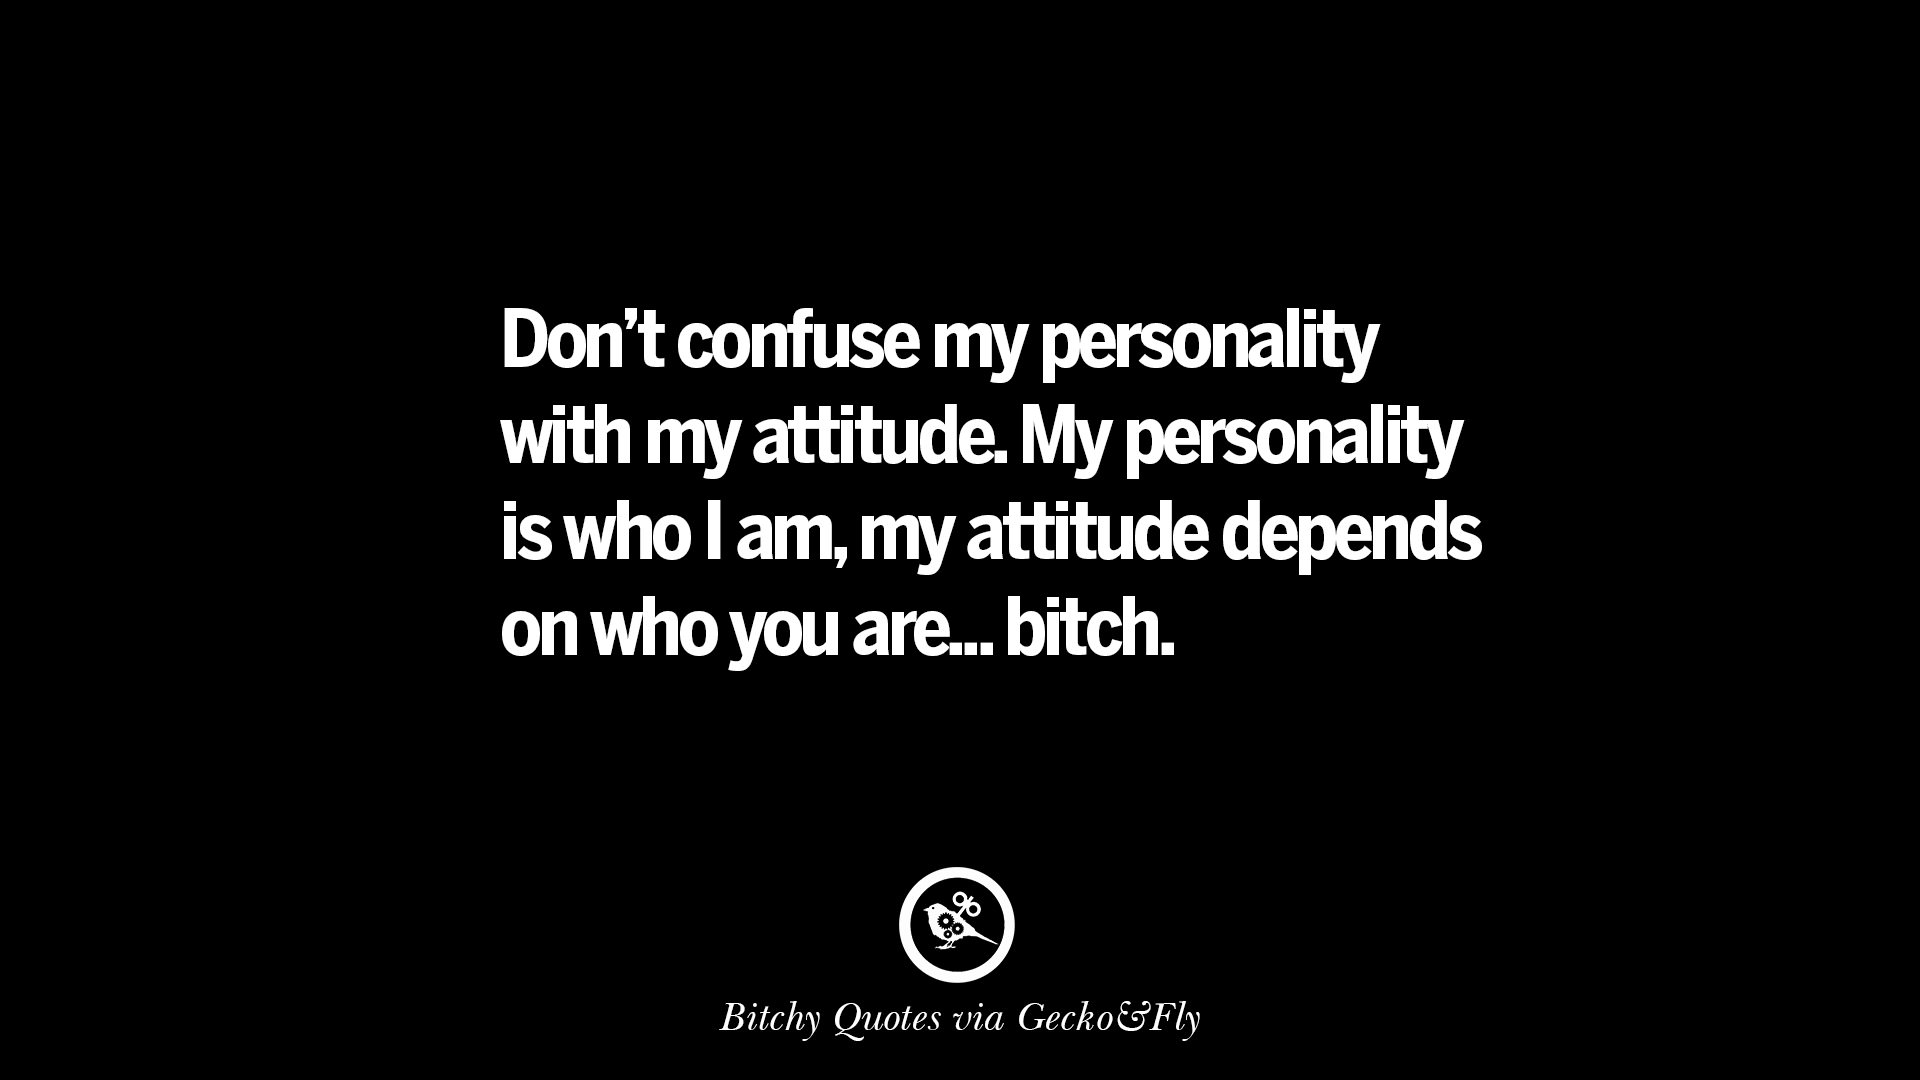 don t confuse my personality with my attitude my personality is who i am my attitude depends on who you are bitch - x instagramcaptionsclever t